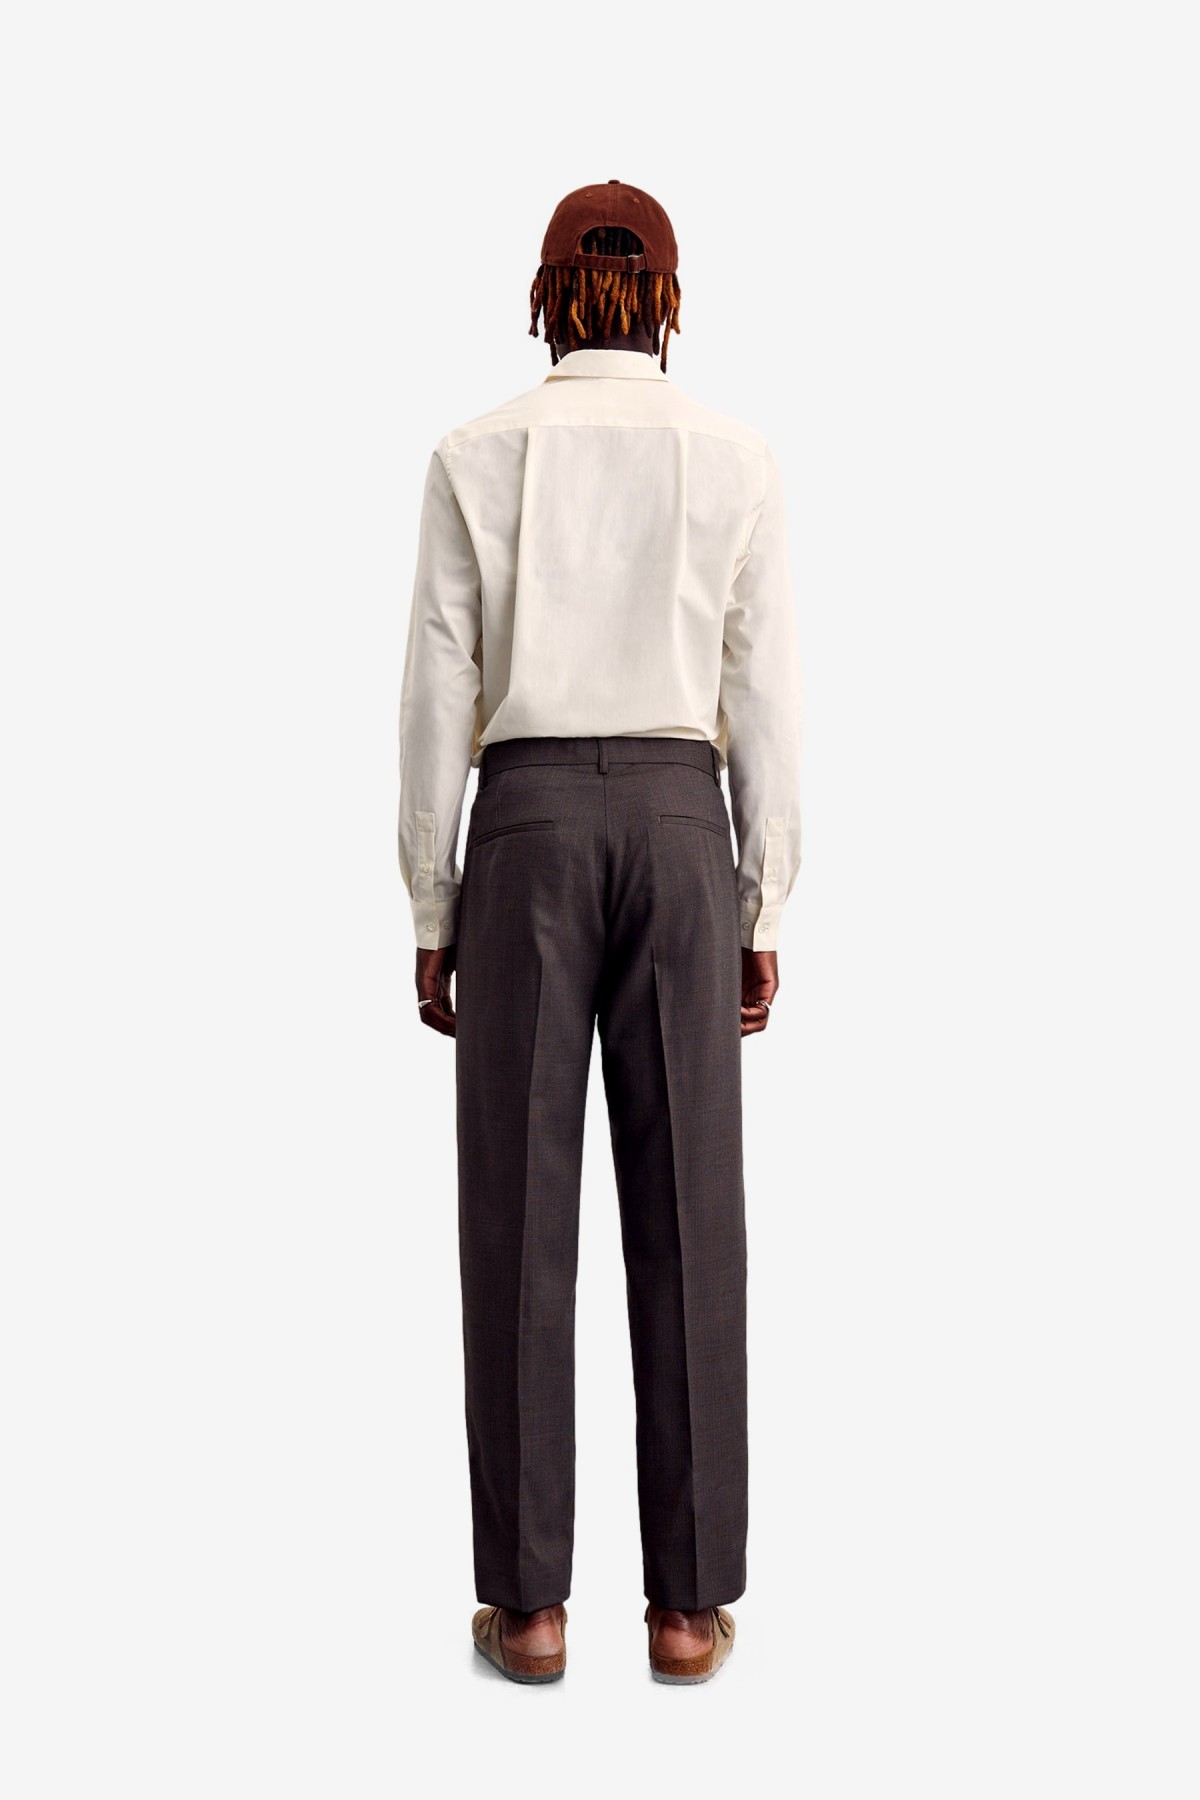 Another Aspect Pants 1.0 in Brown Pin Stripe